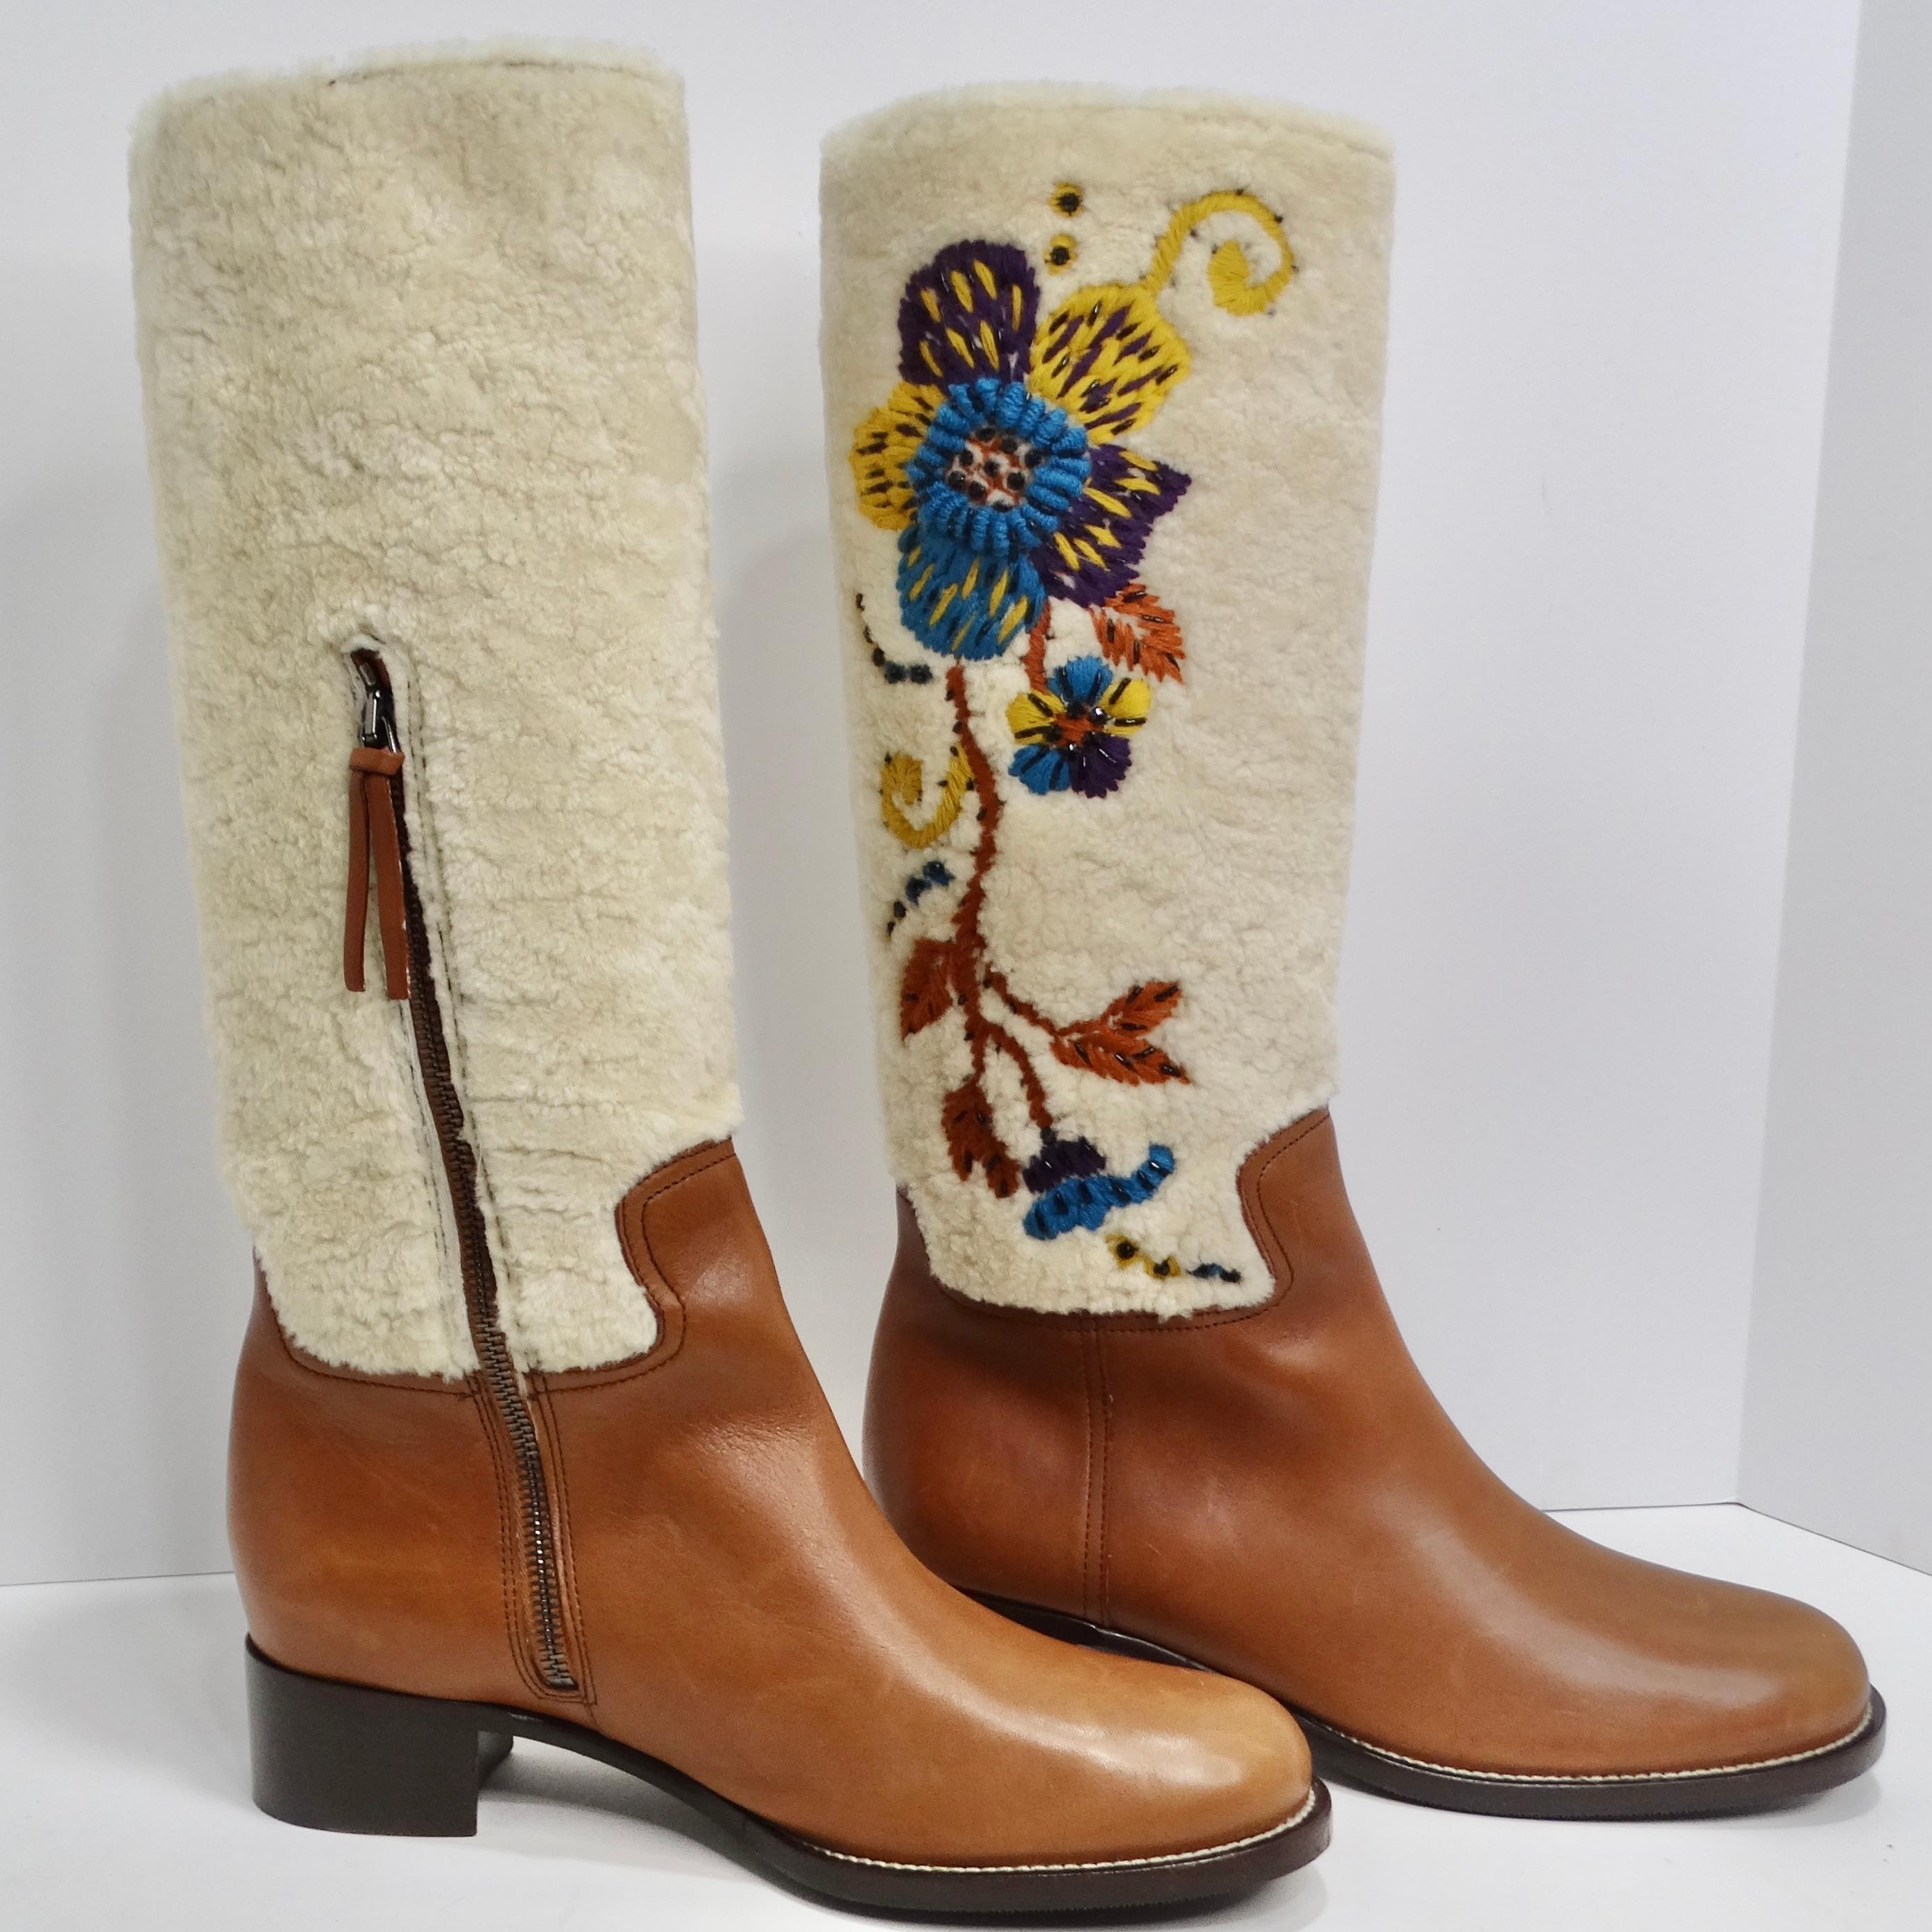  Miu Miu Floral Brown Leather Floral Shearling Riding Boots For Sale 4